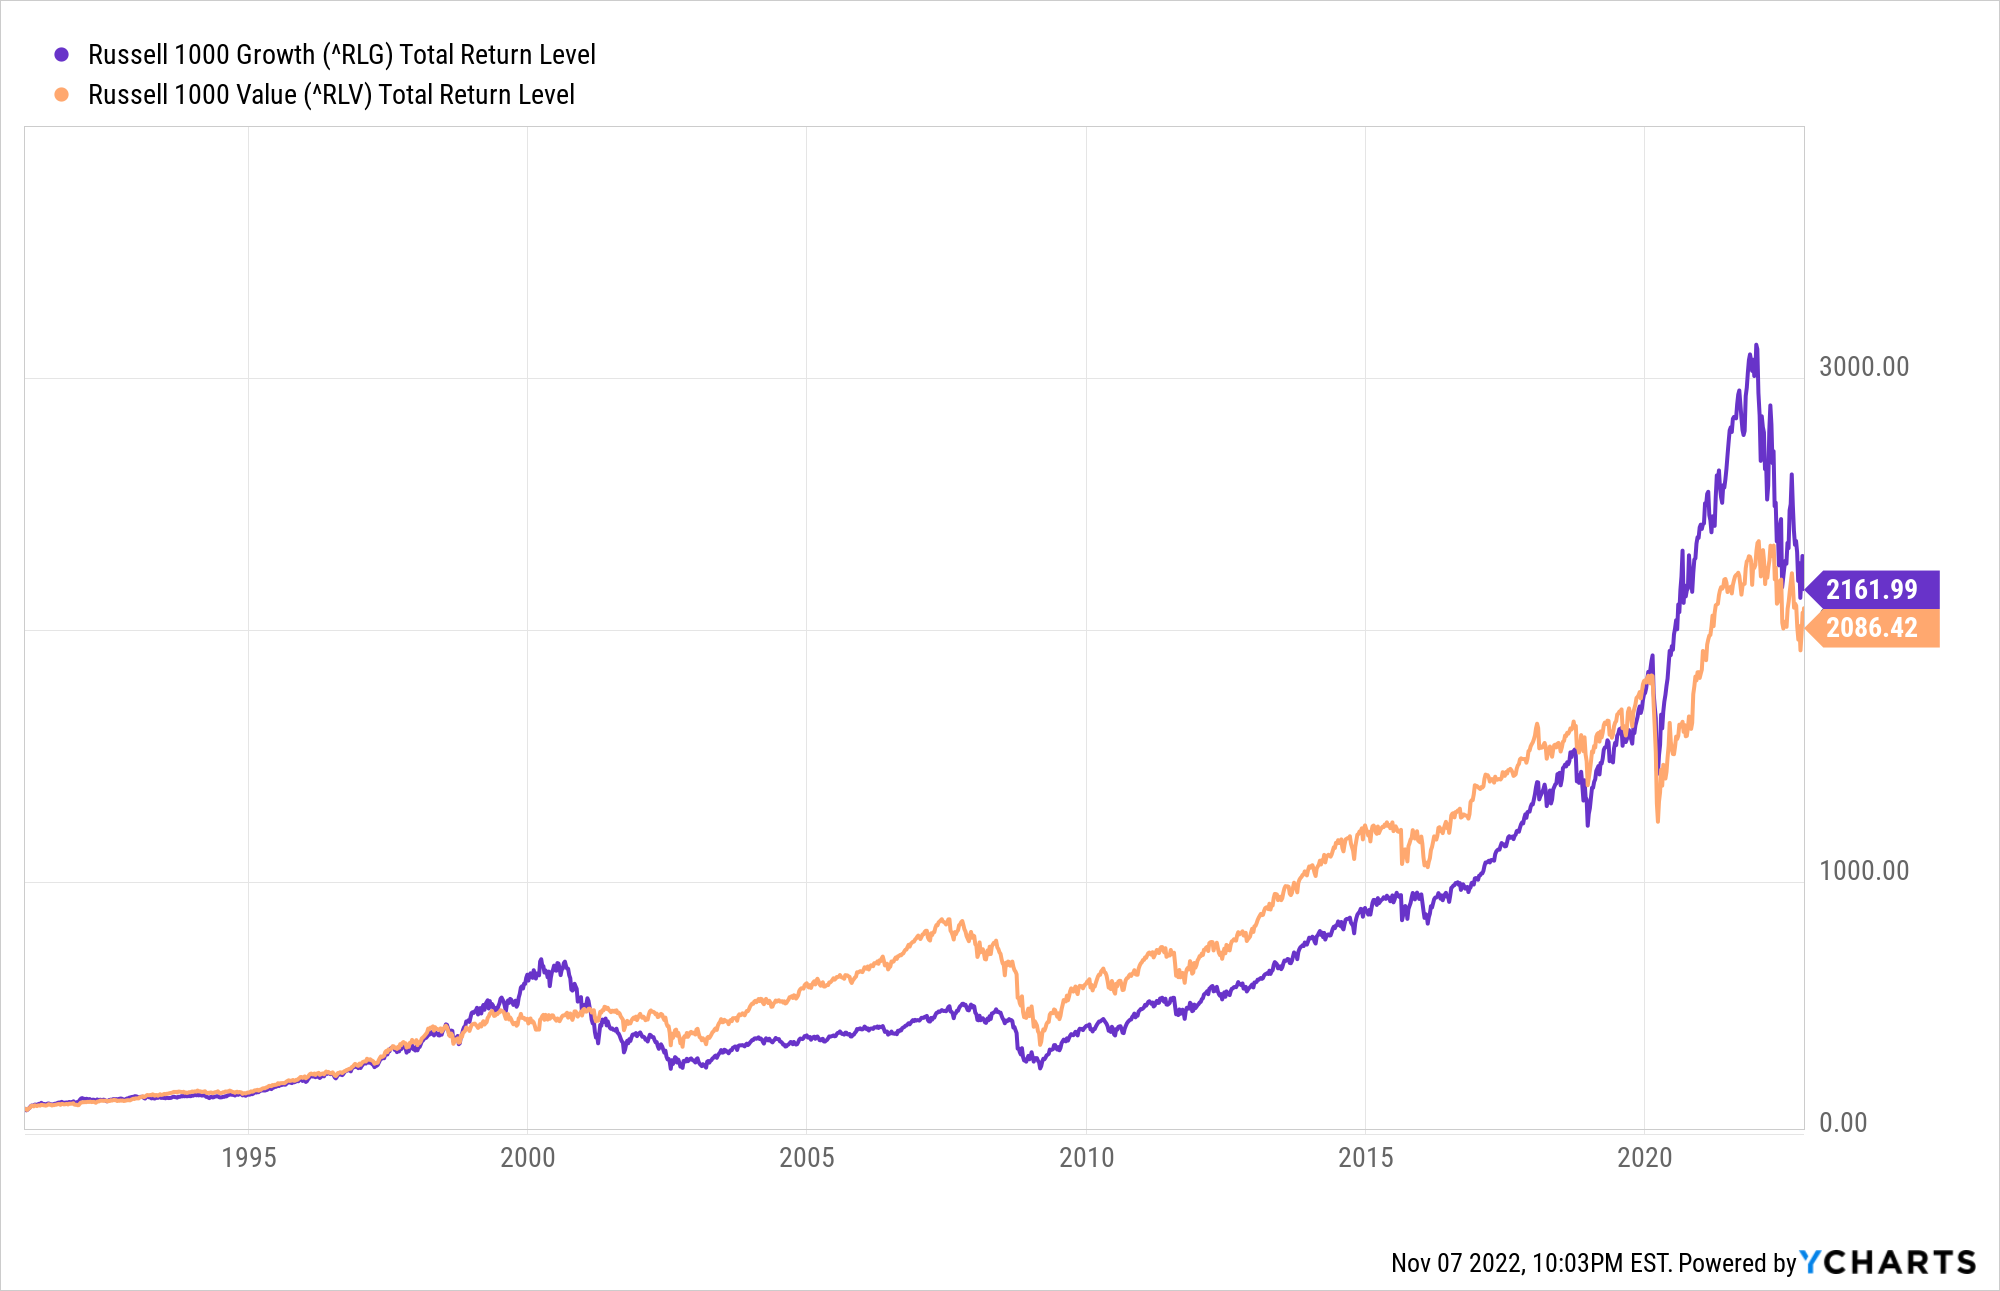 Value versus growth over the long run. (Source: YCHARTS)